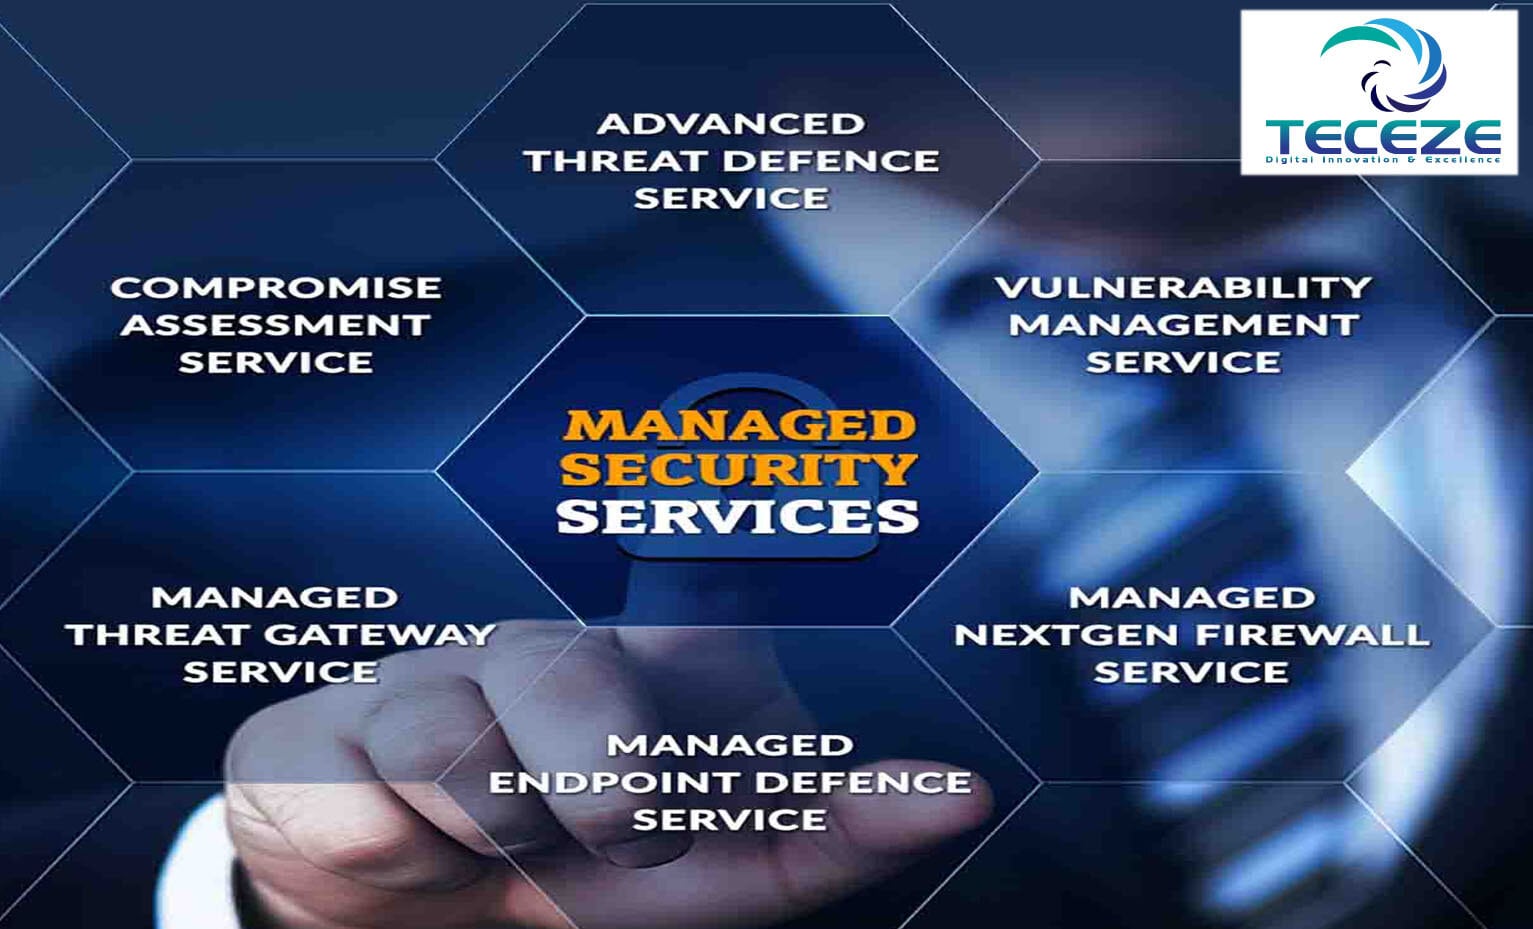 Why Do You Need Managed Security Services?